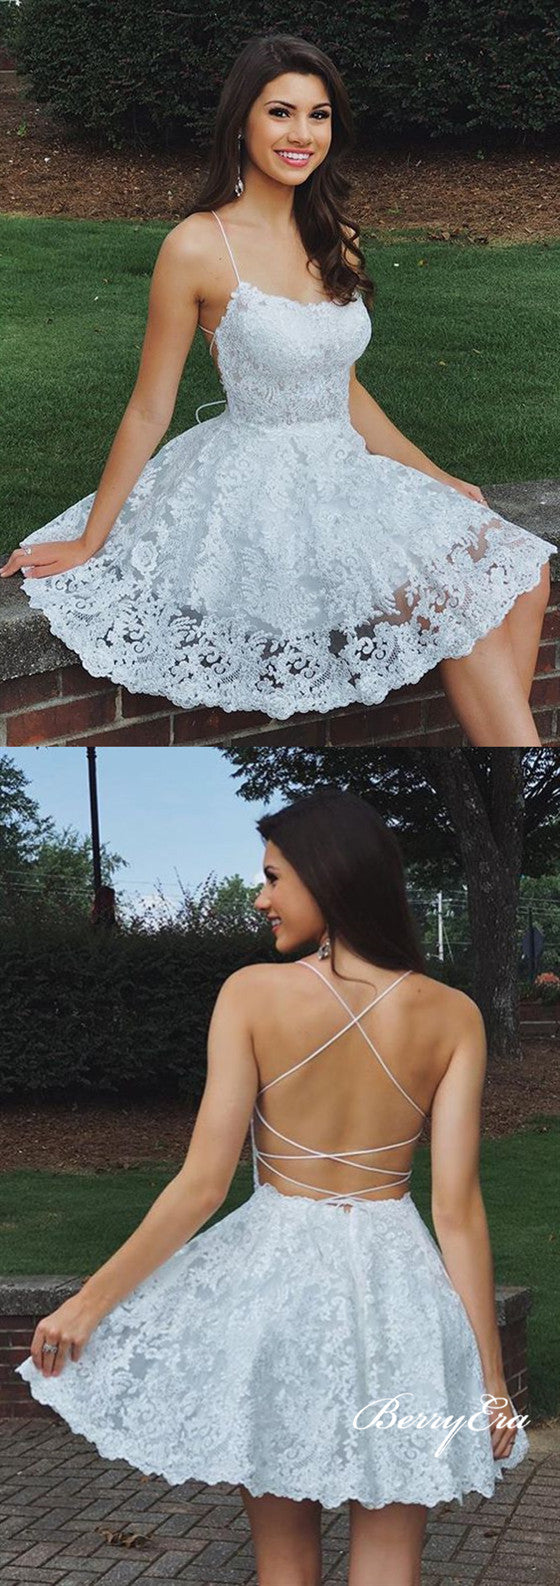 Lovely Lace Short Prom Dresses, Lace Homecoming Dresses, Homecoming Dresses